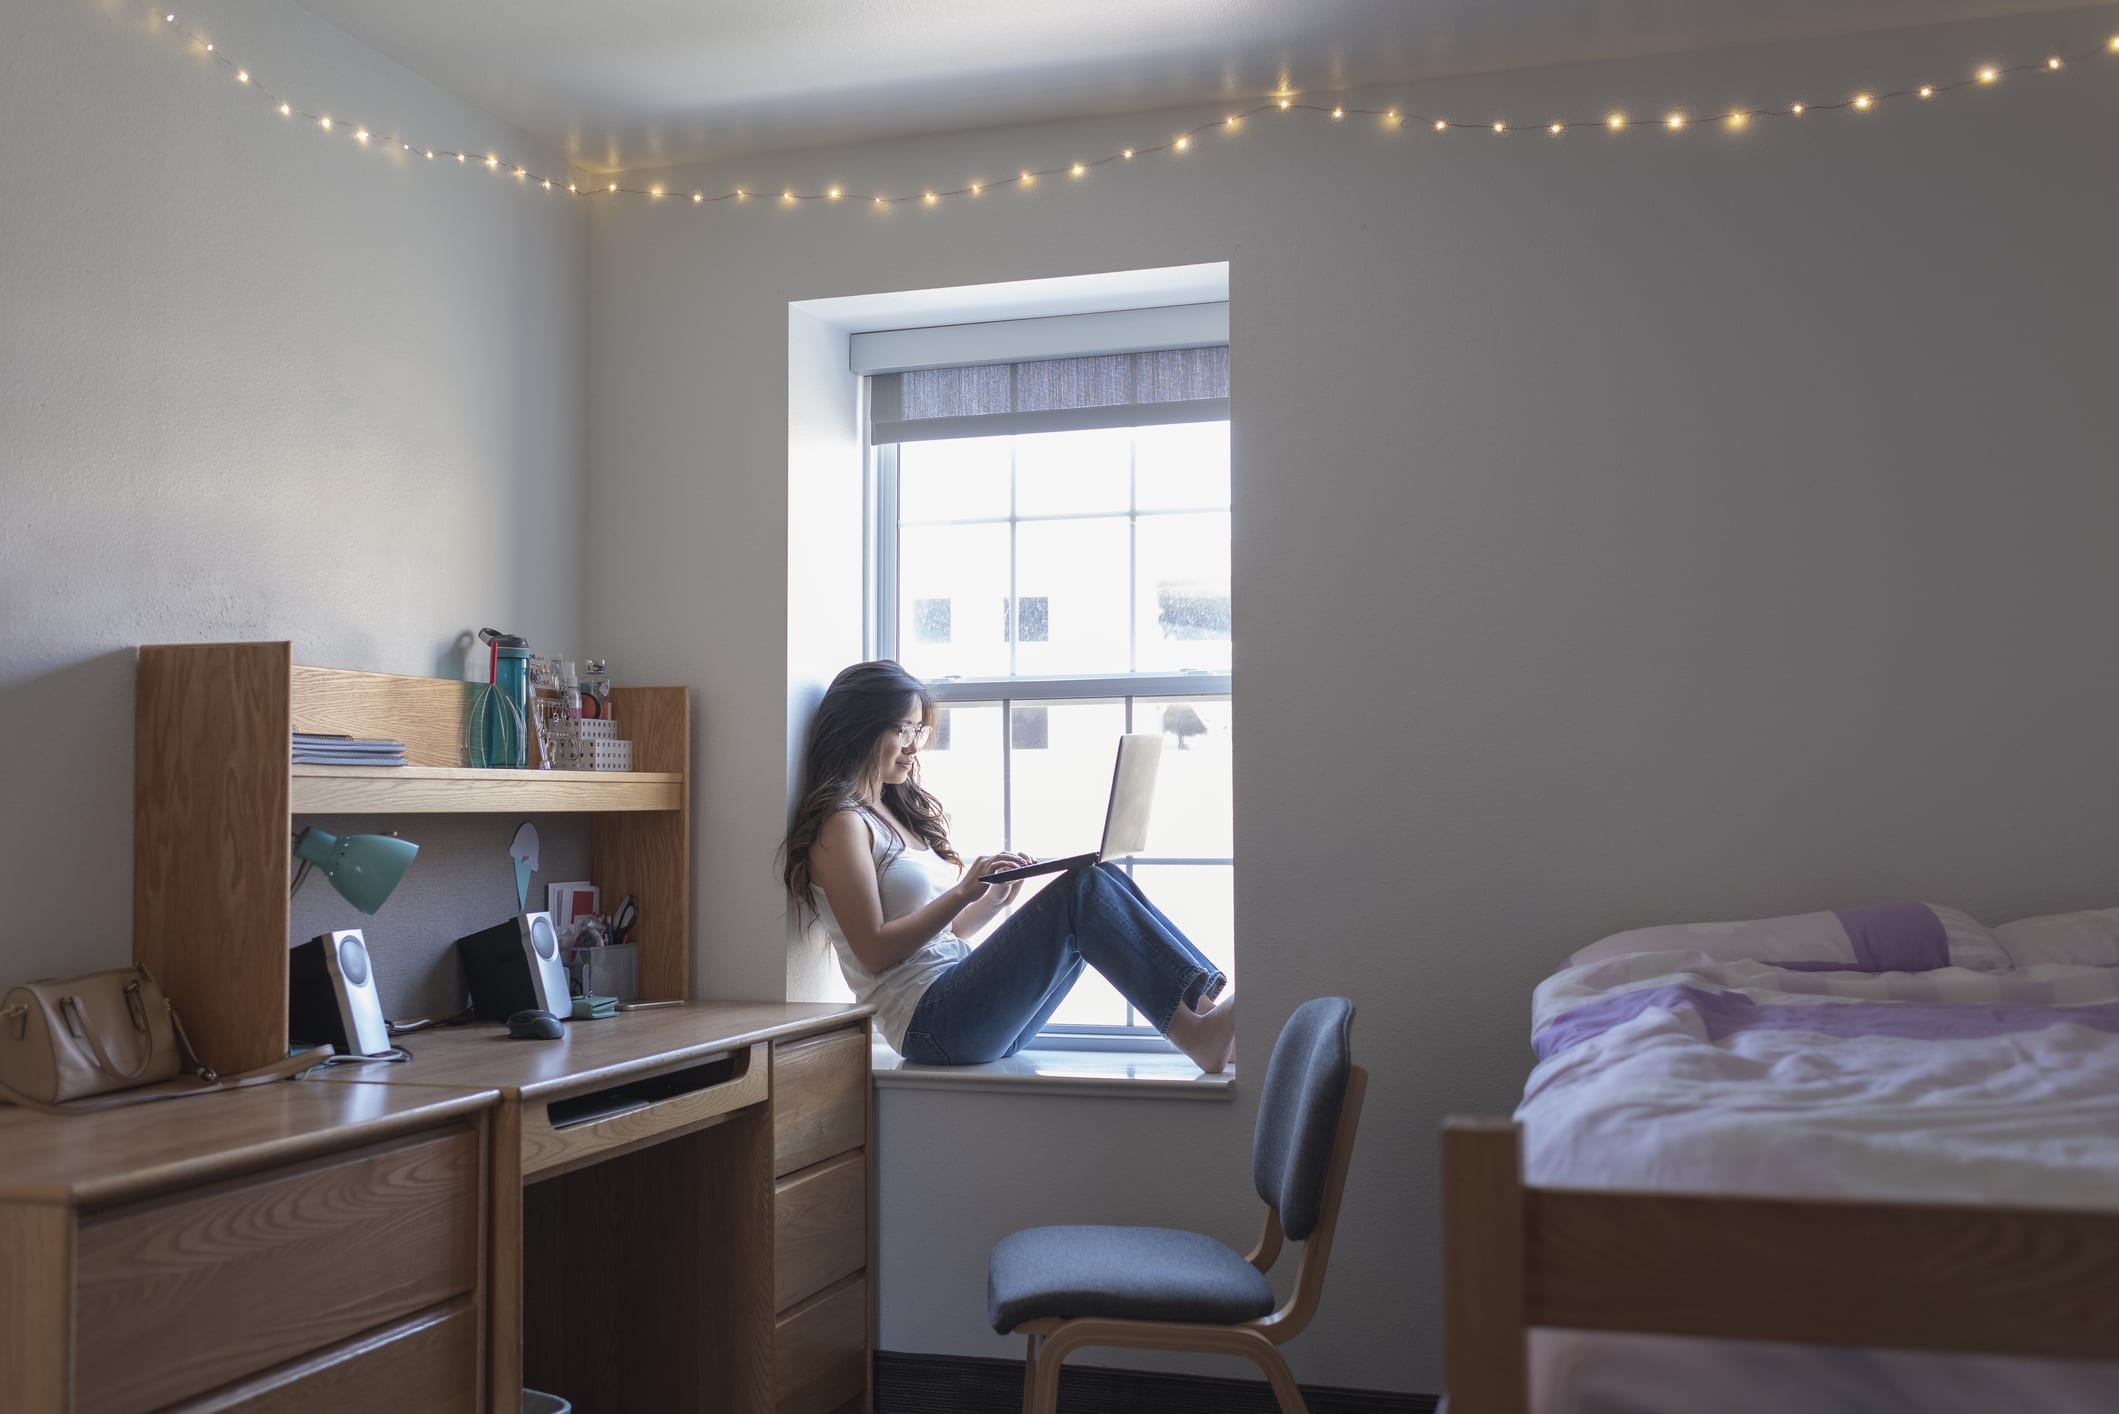 College Dorm Gifts for Students